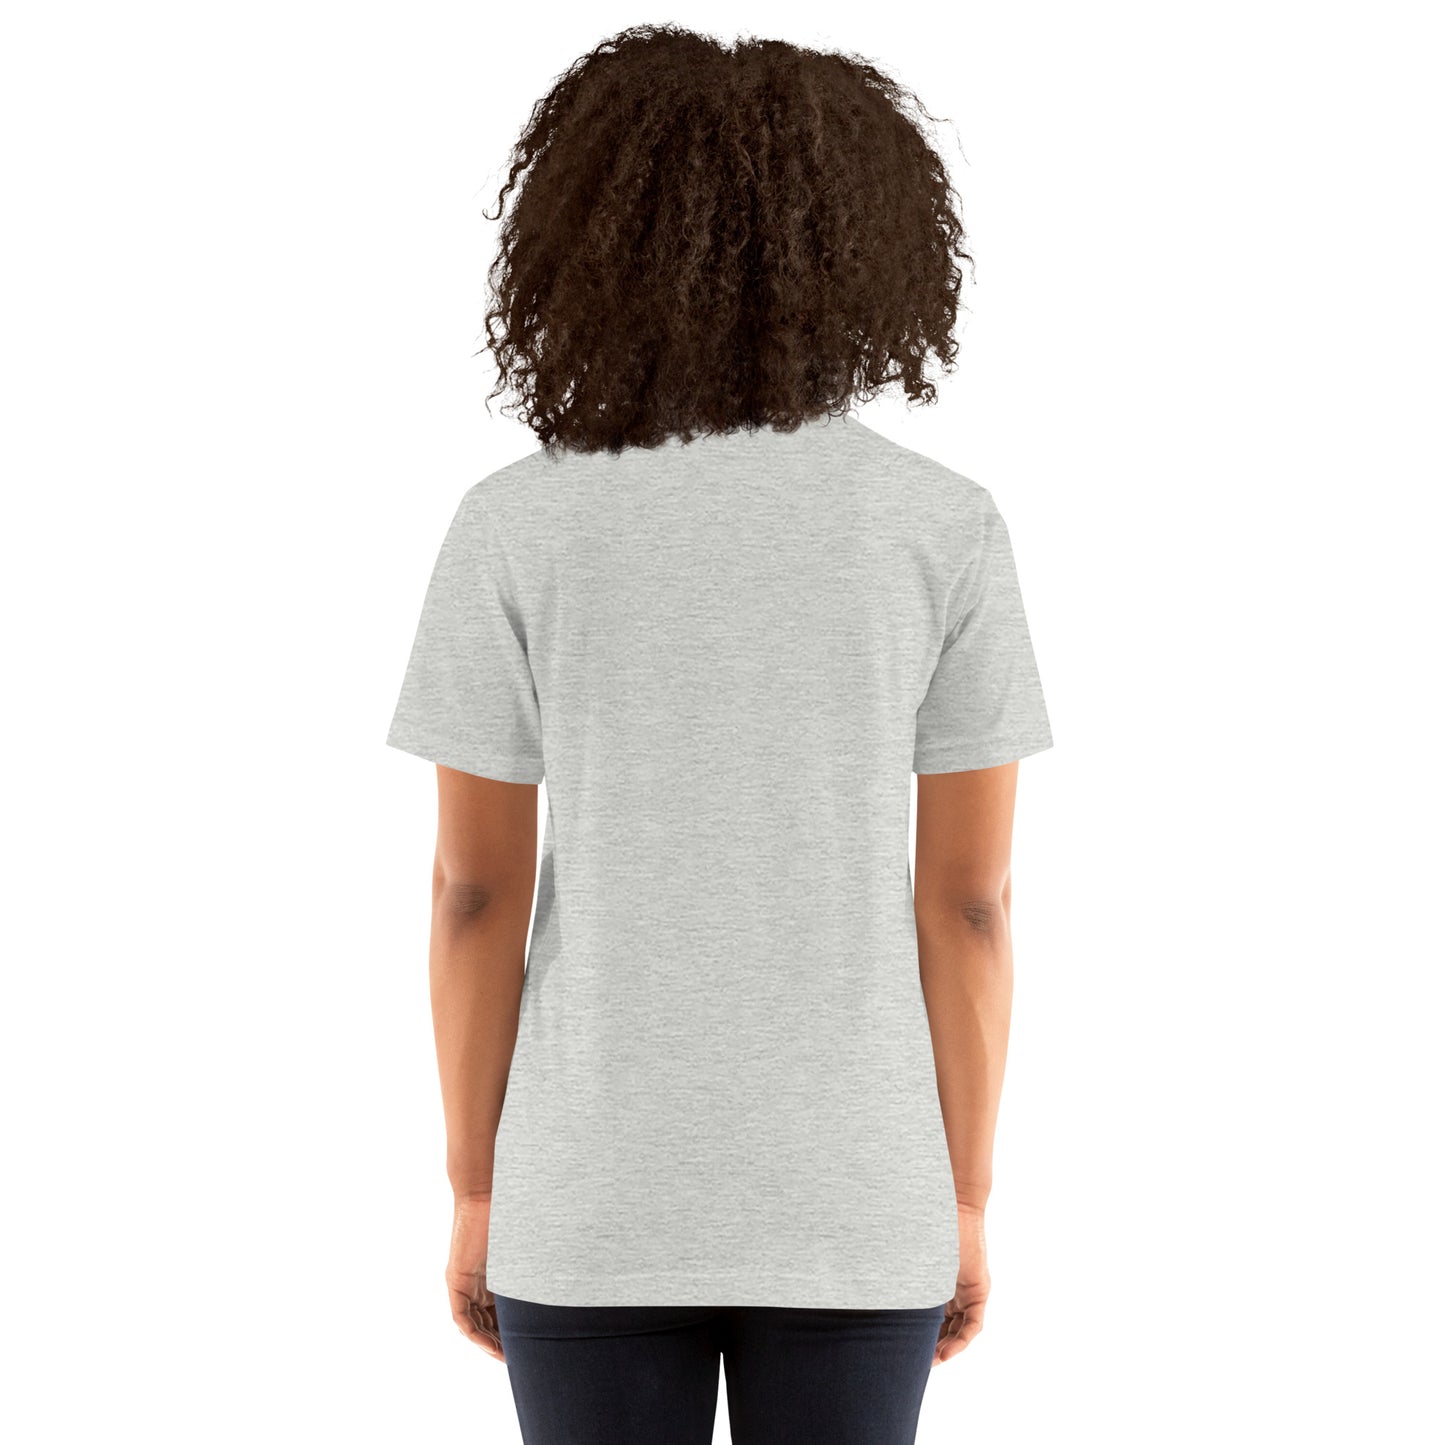 Looking Out T-shirt